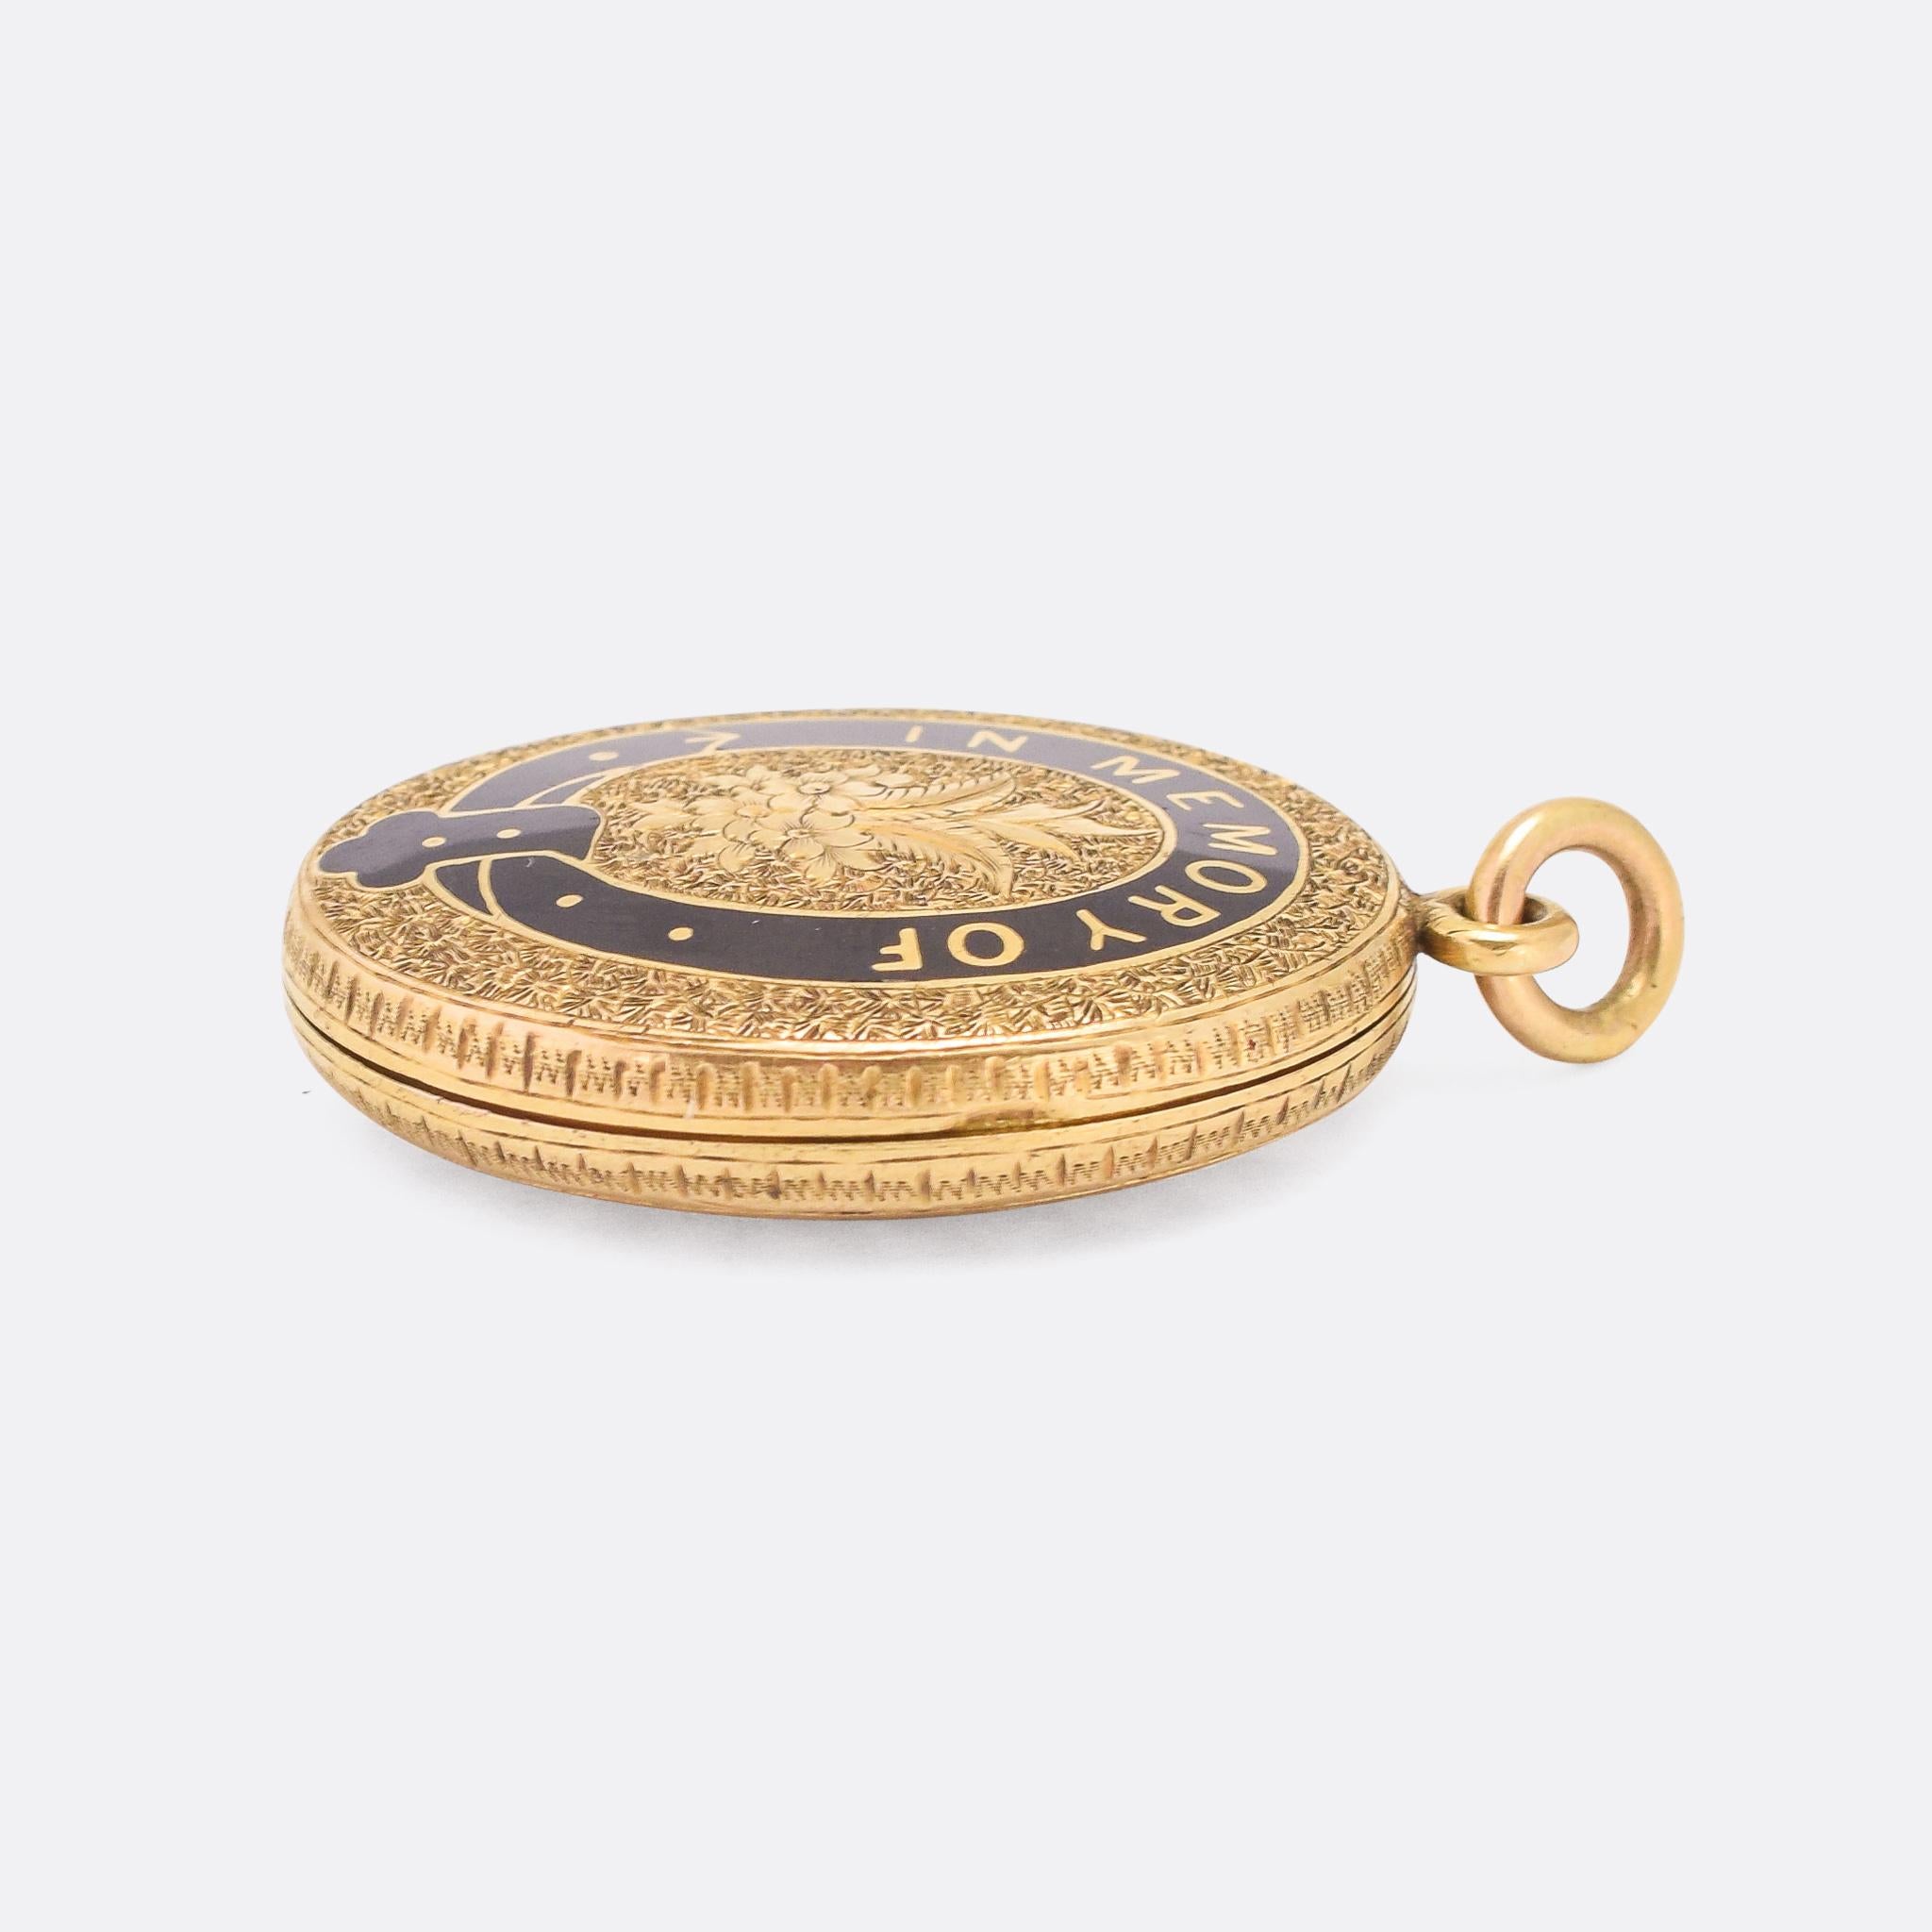 Beautiful Victorian IN MEMORY OF mourning locket dating from the latter half of the 19th Century, circa 1880. It's crafted in 15 karat gold and finished in black enamel that forms a buckle motif with the lettering within. The piece is intricately